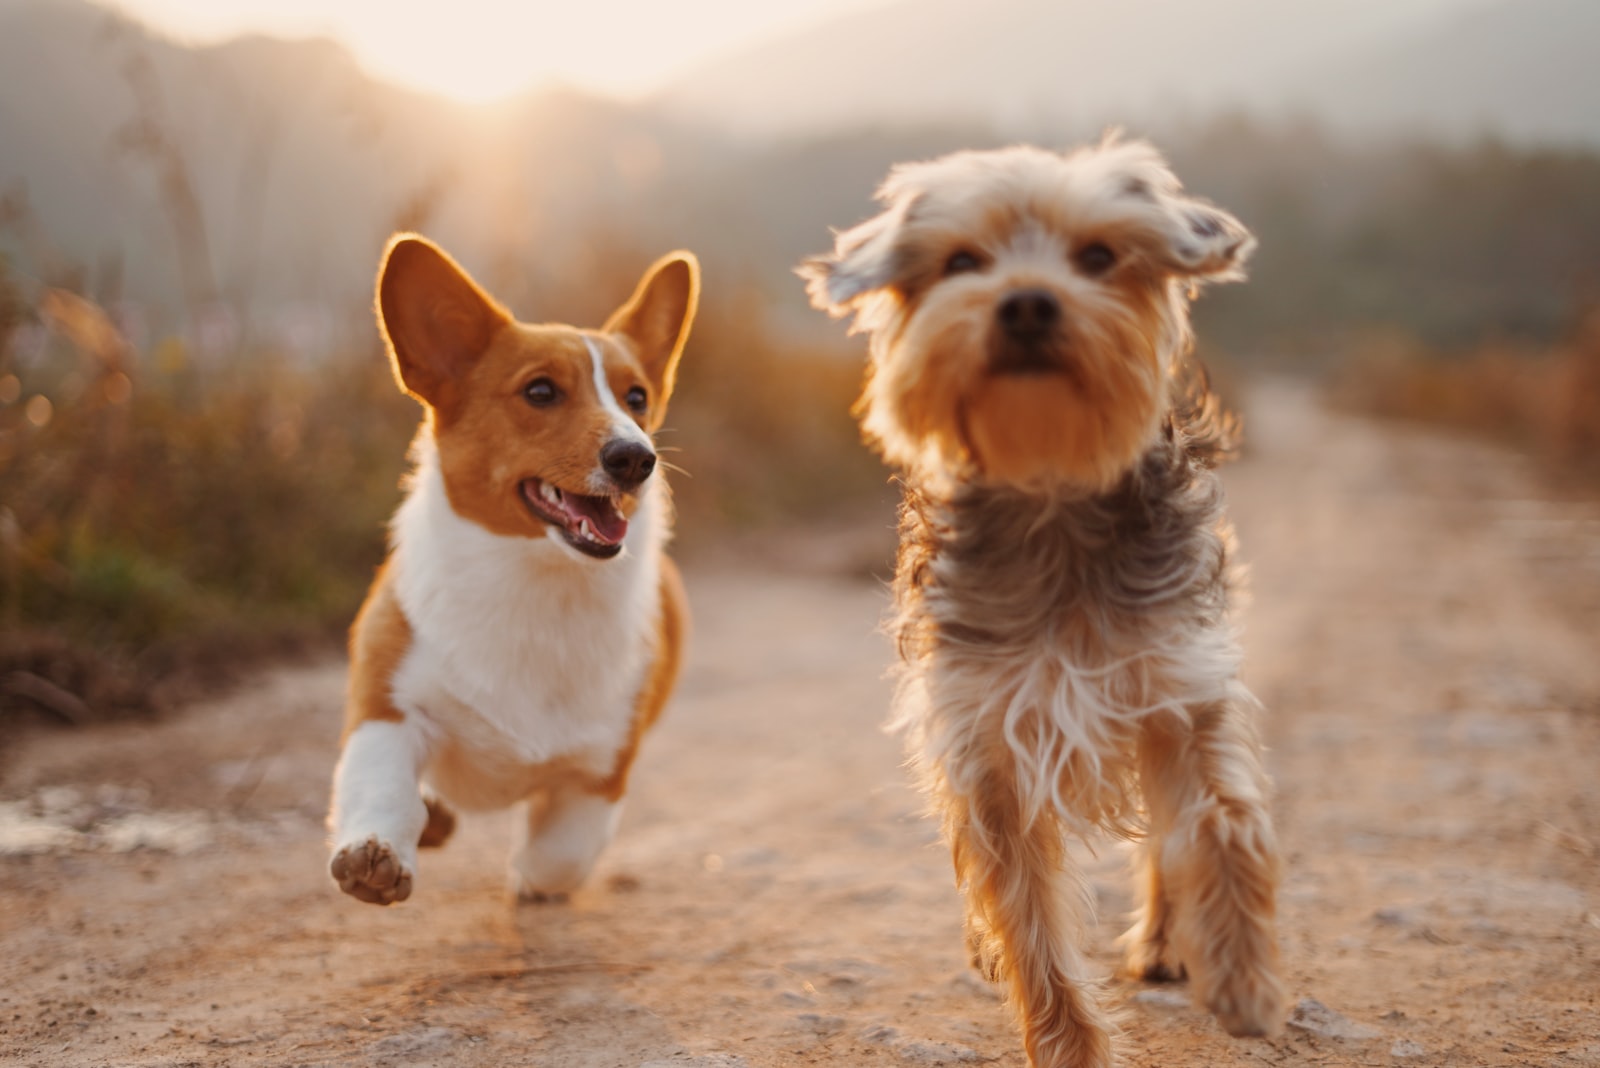 BIG4 Port Fairy welcomes your pet dogs on powered sites